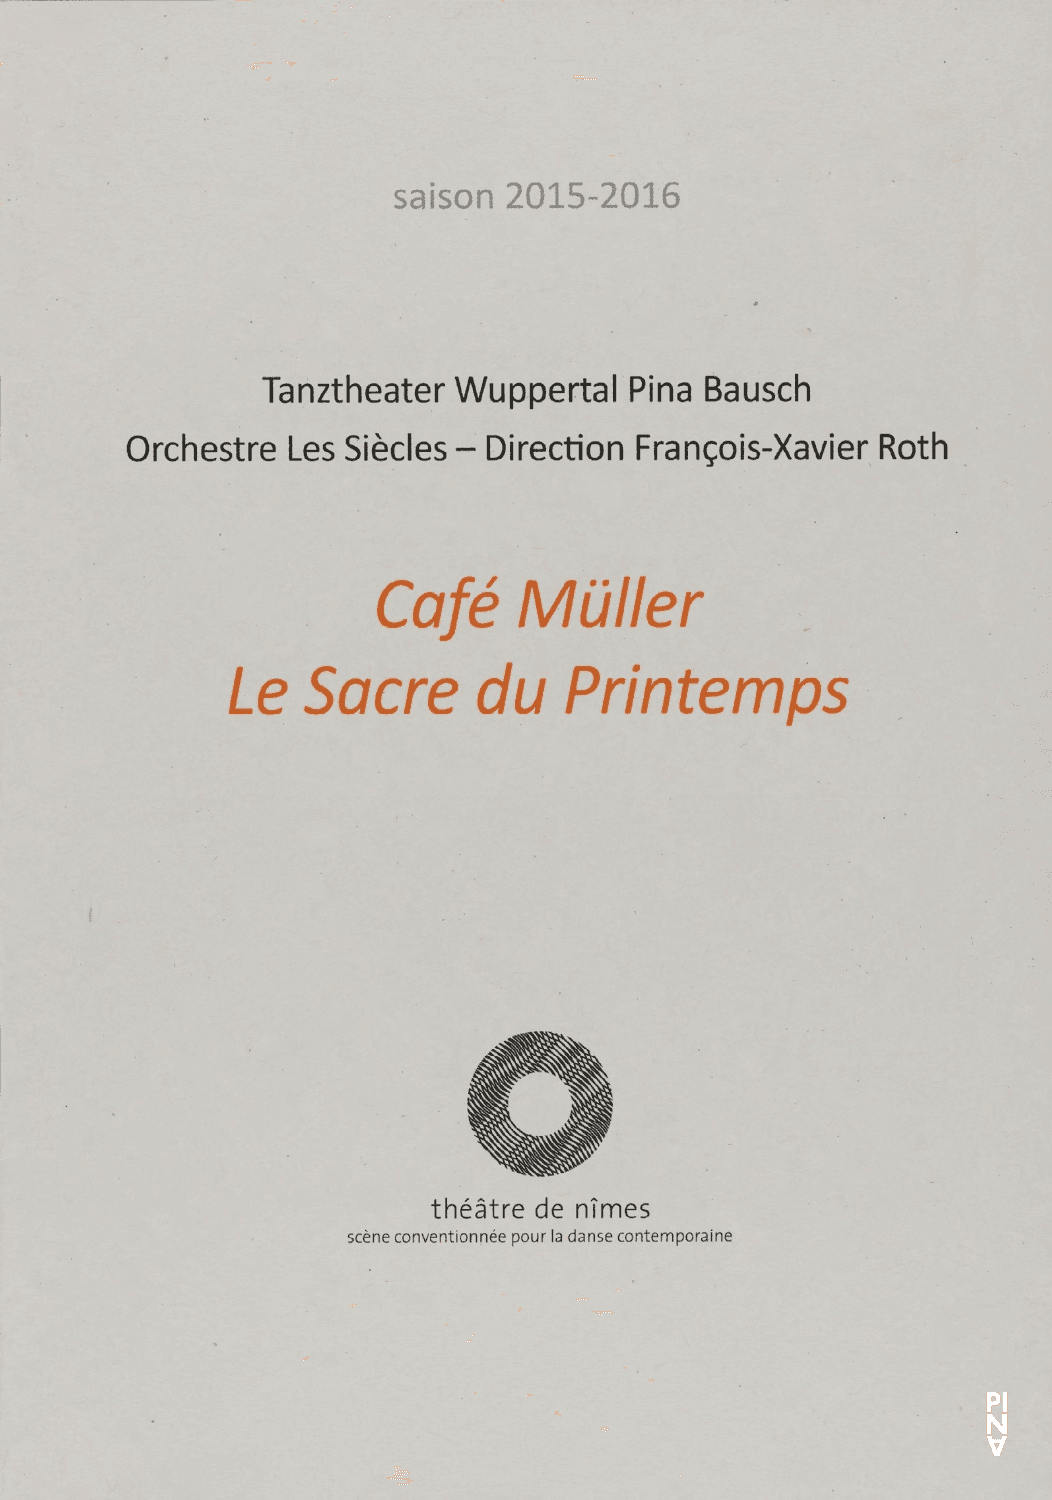 Booklet for “Café Müller” and “The Rite of Spring” by Pina Bausch with Tanztheater Wuppertal in in Nîmes, 06/06/2016 – 06/09/2016